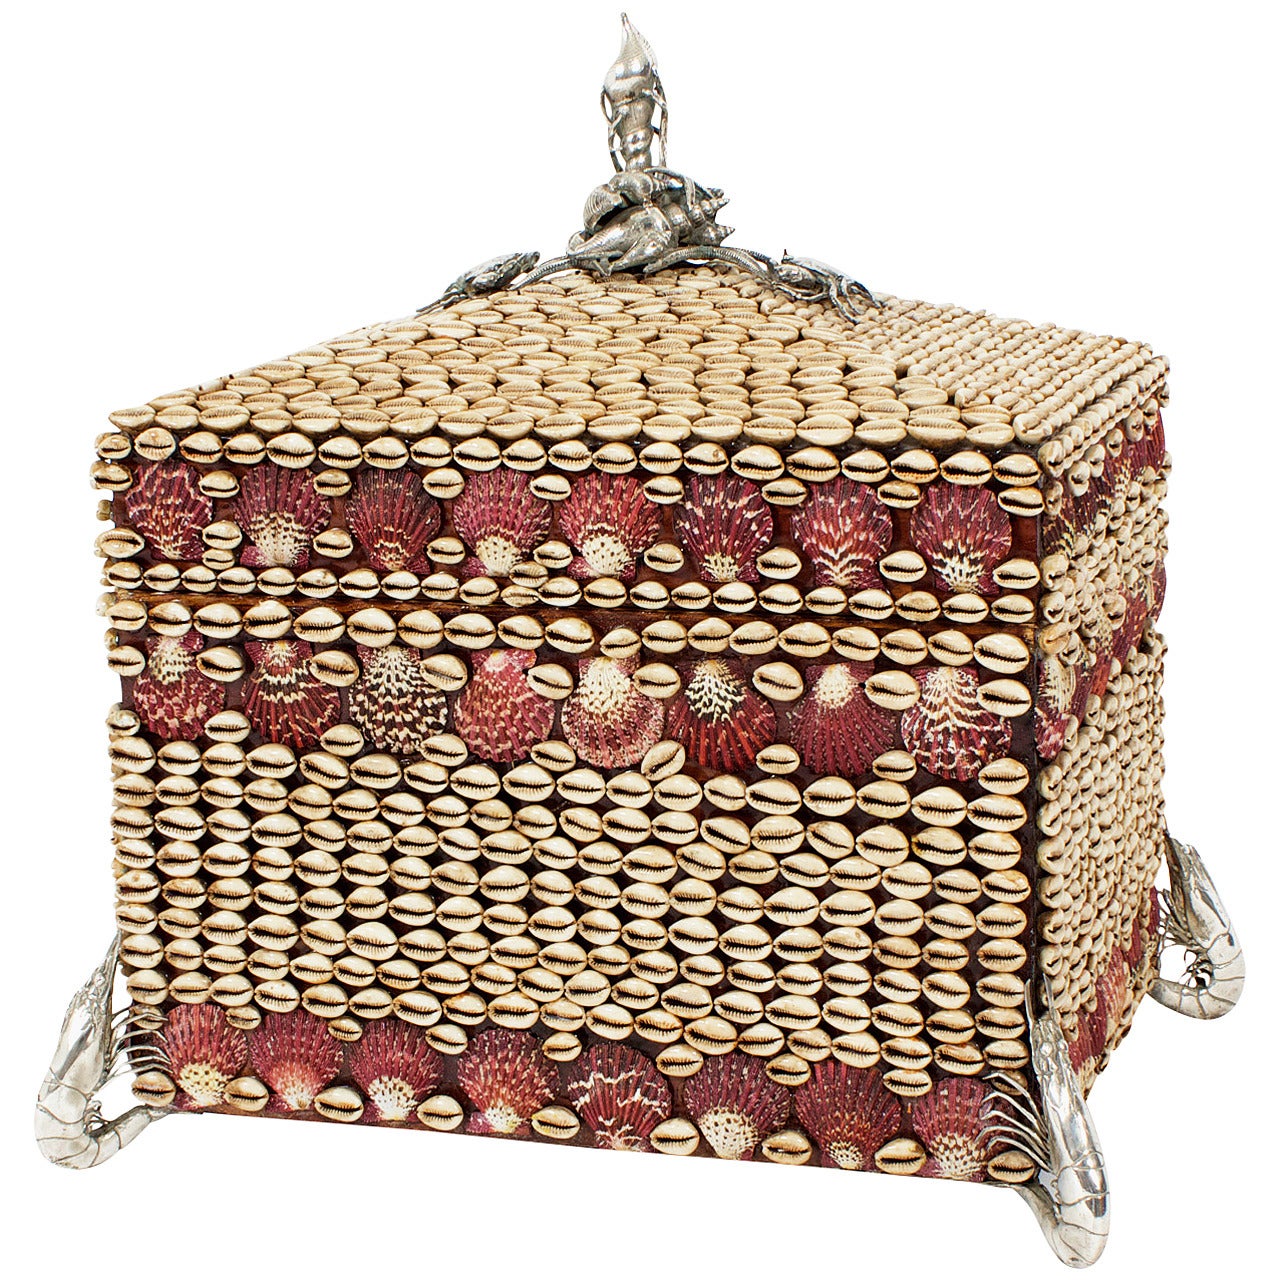 Large Seashell Encrusted Box with Slivered Crustacean Accents